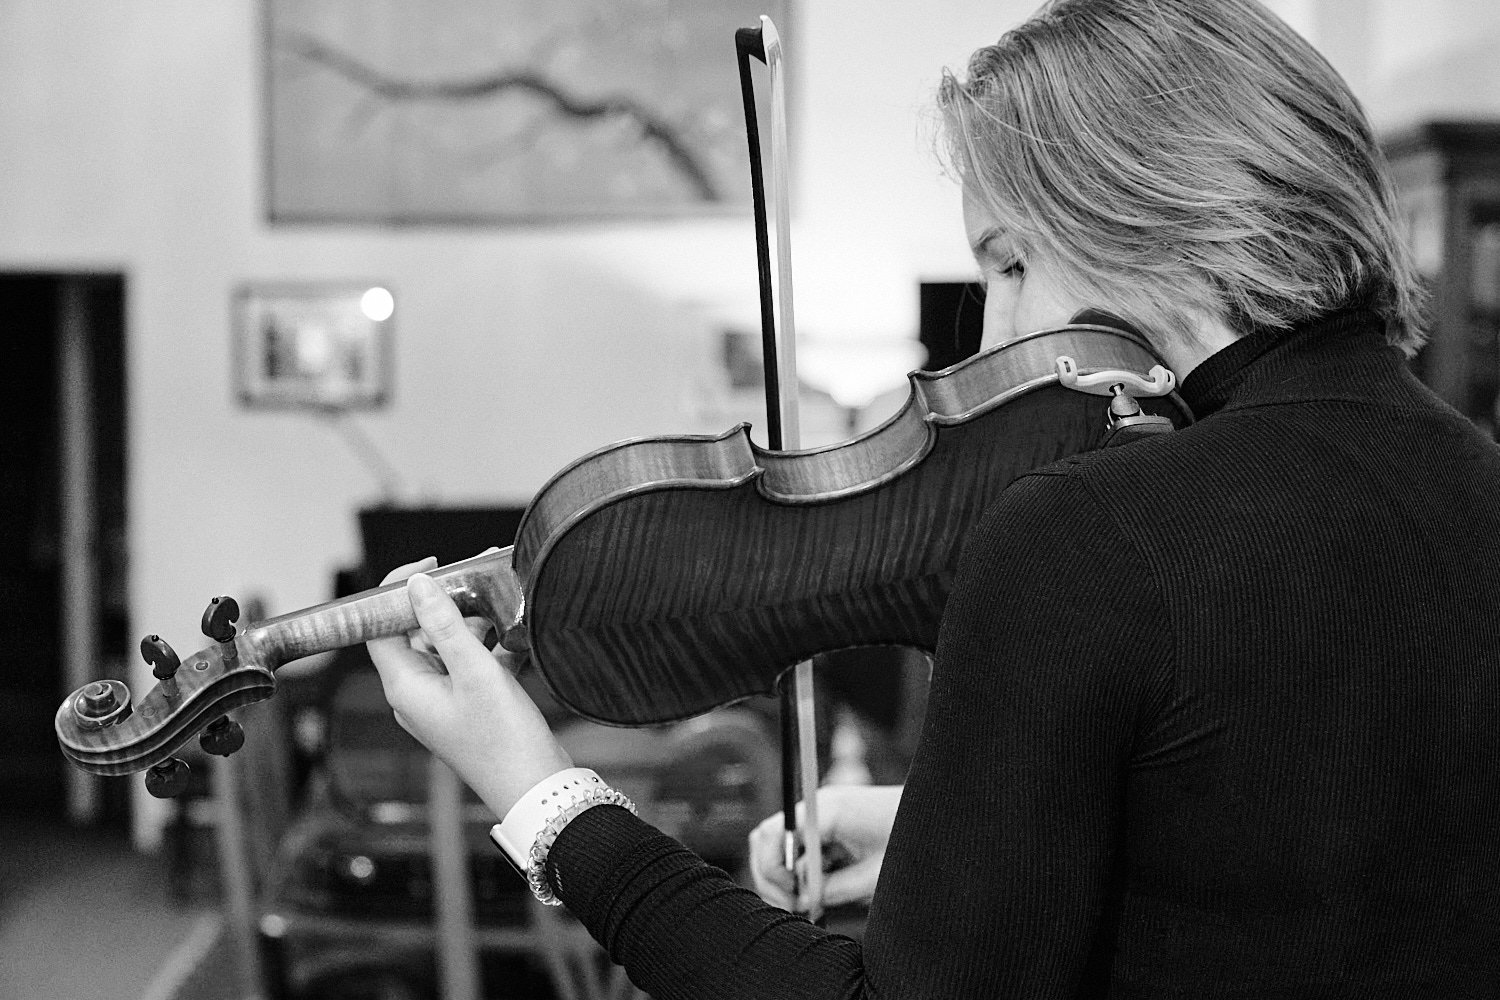  Alena Gurevich is testing new violins at Phillip Injeian Violin Shop in downtown Pittsburgh, Western Pennsylvania, USA. The musical instruments sound beautiful and clear and the girl looks happy 